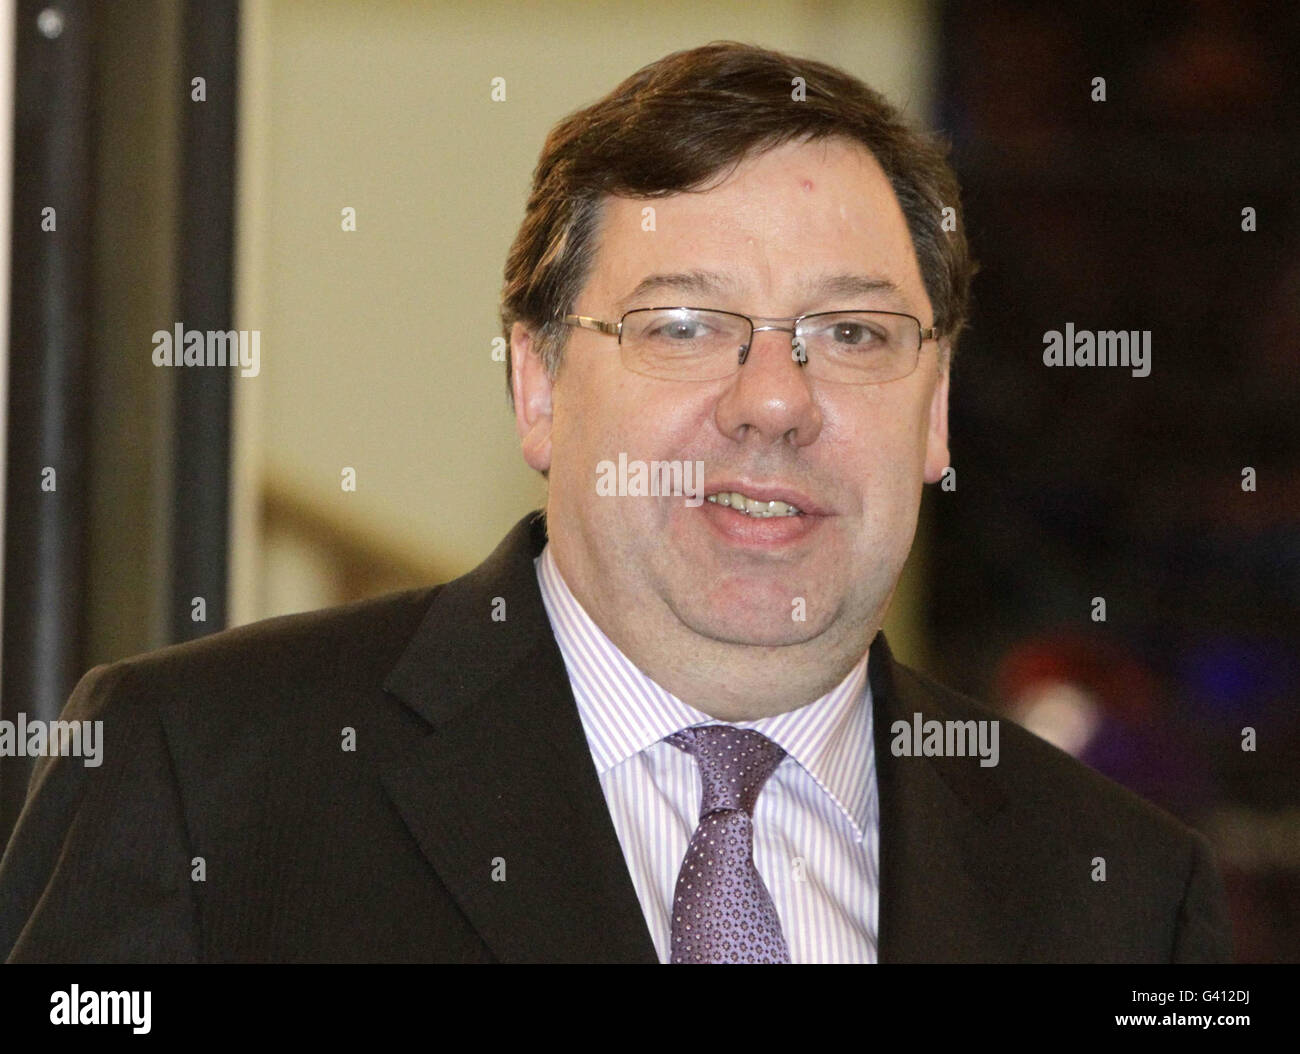 Taoiseach Brian Cowen poses for pictures at Government Buildings in Dublin, who retained control of the ruling Fianna Fail party after winning a motion of confidence in his leadership this evening. Stock Photo